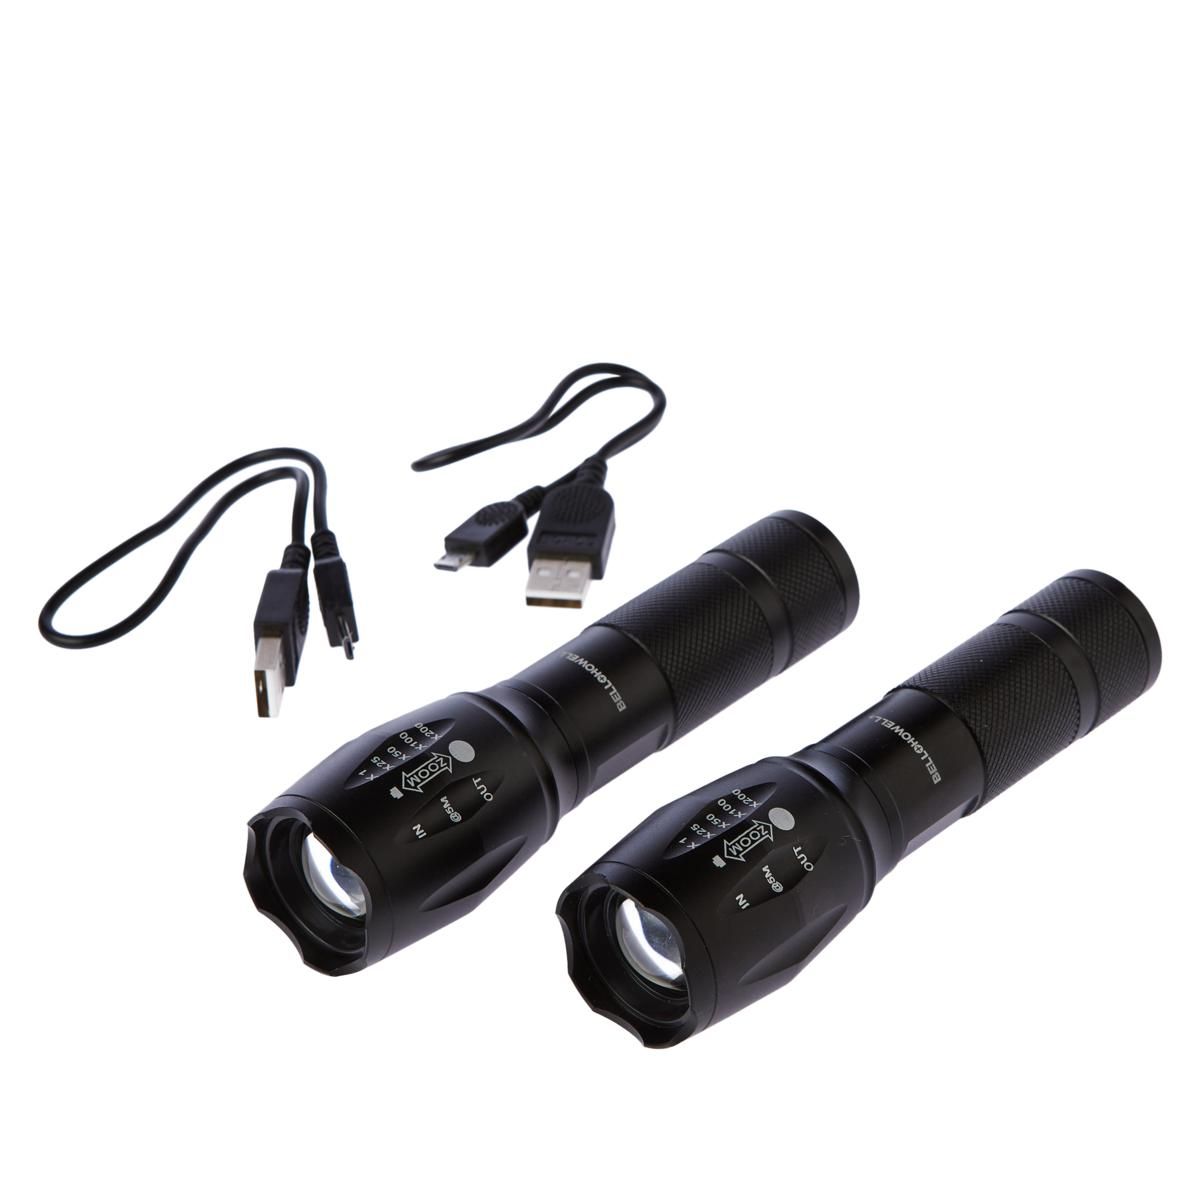 Bell + Howell Rechargeable TacLight and Power Bank 2-pack - 20028388 | HSN | HSN